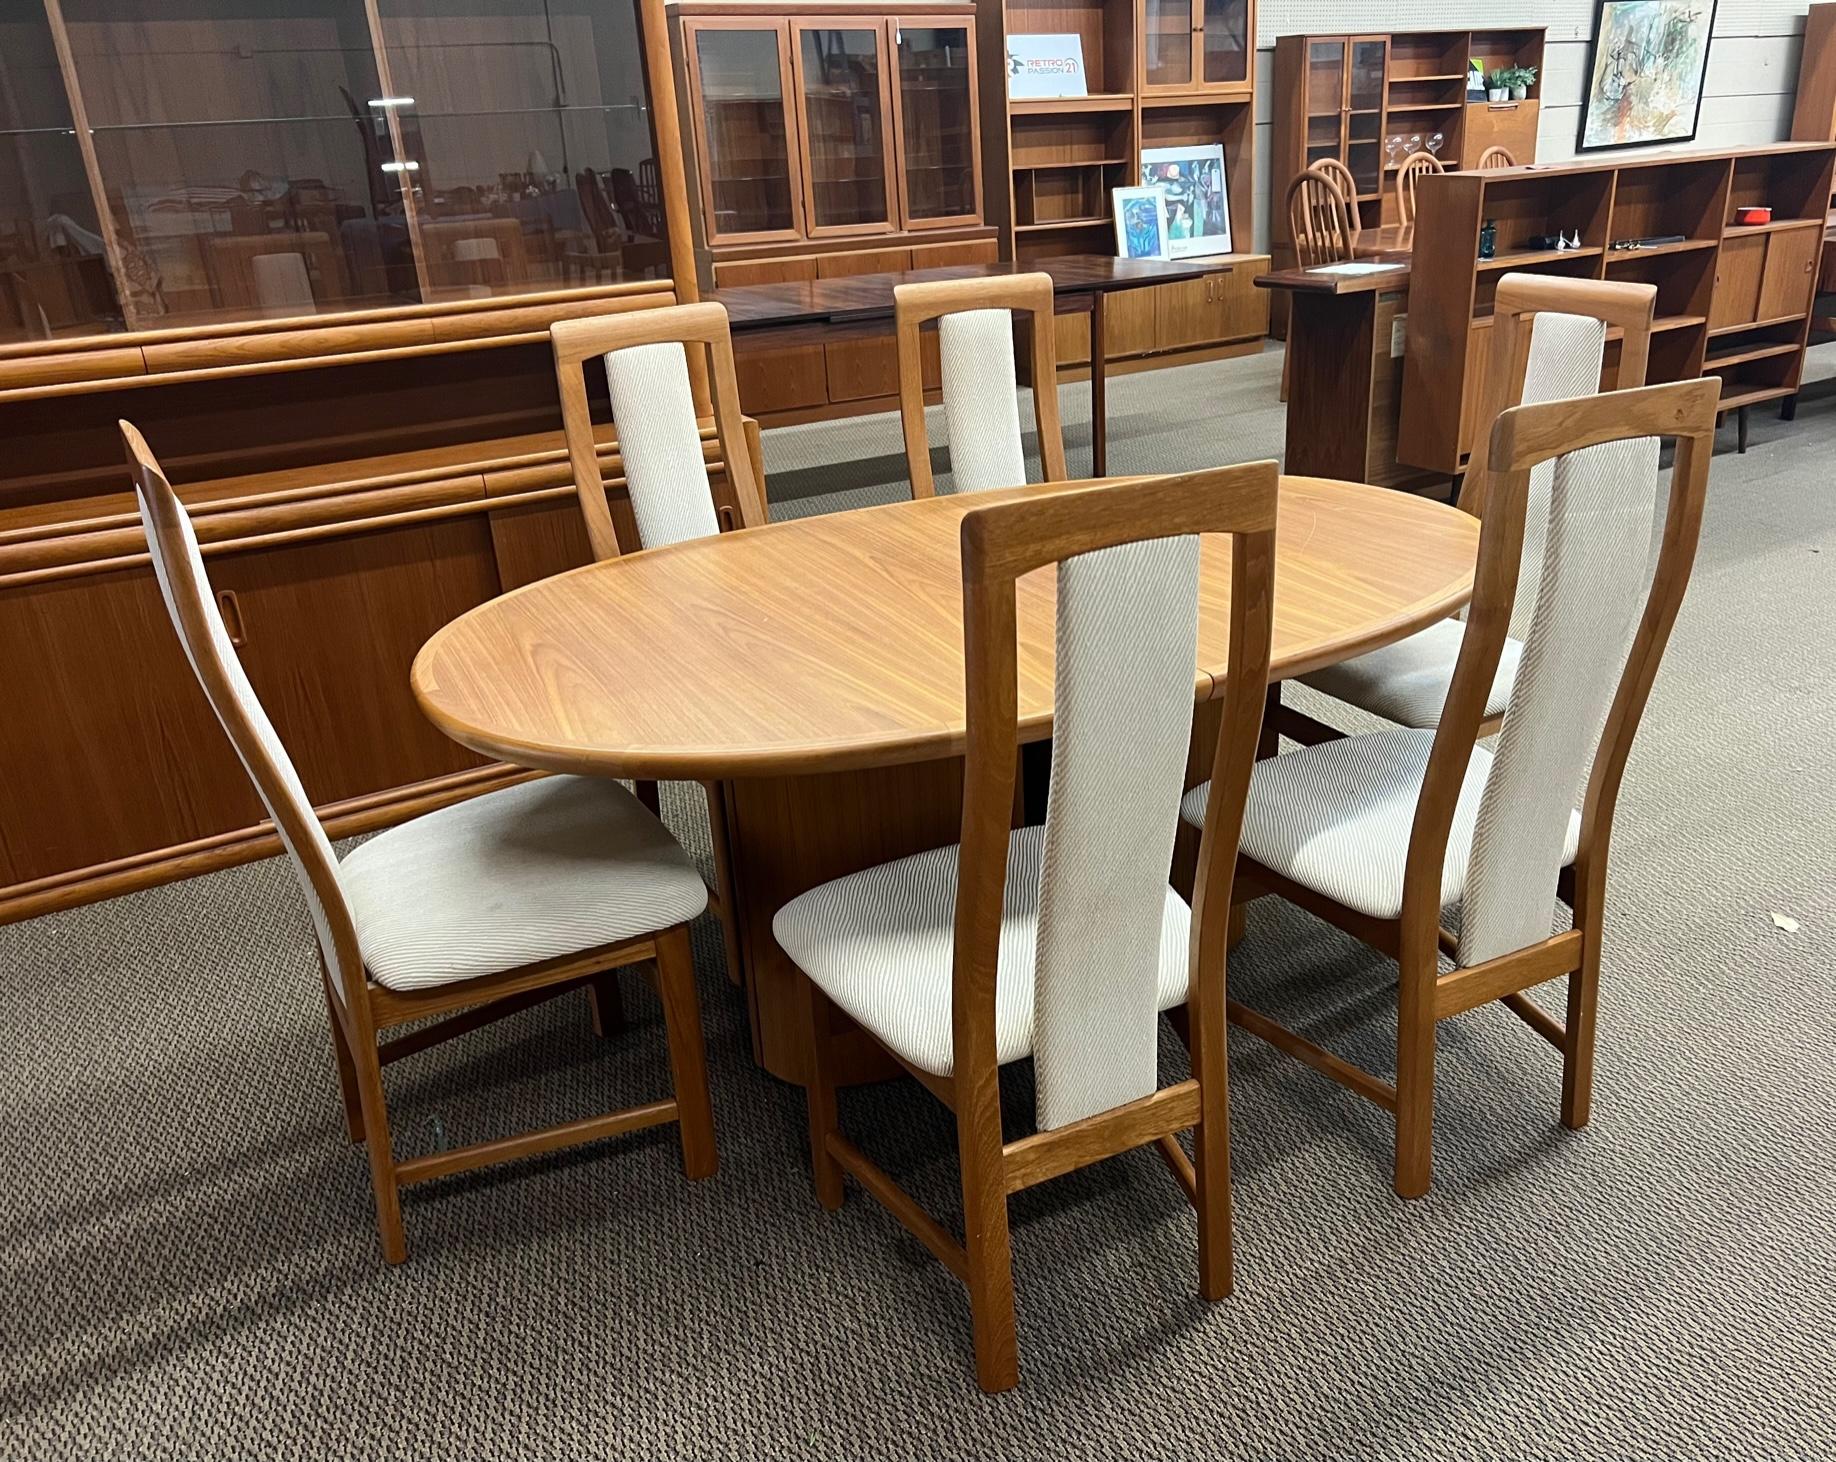 6 Midcentury Danish Modern Teak Dining Chairs by Nordic Furniture Markdale 5